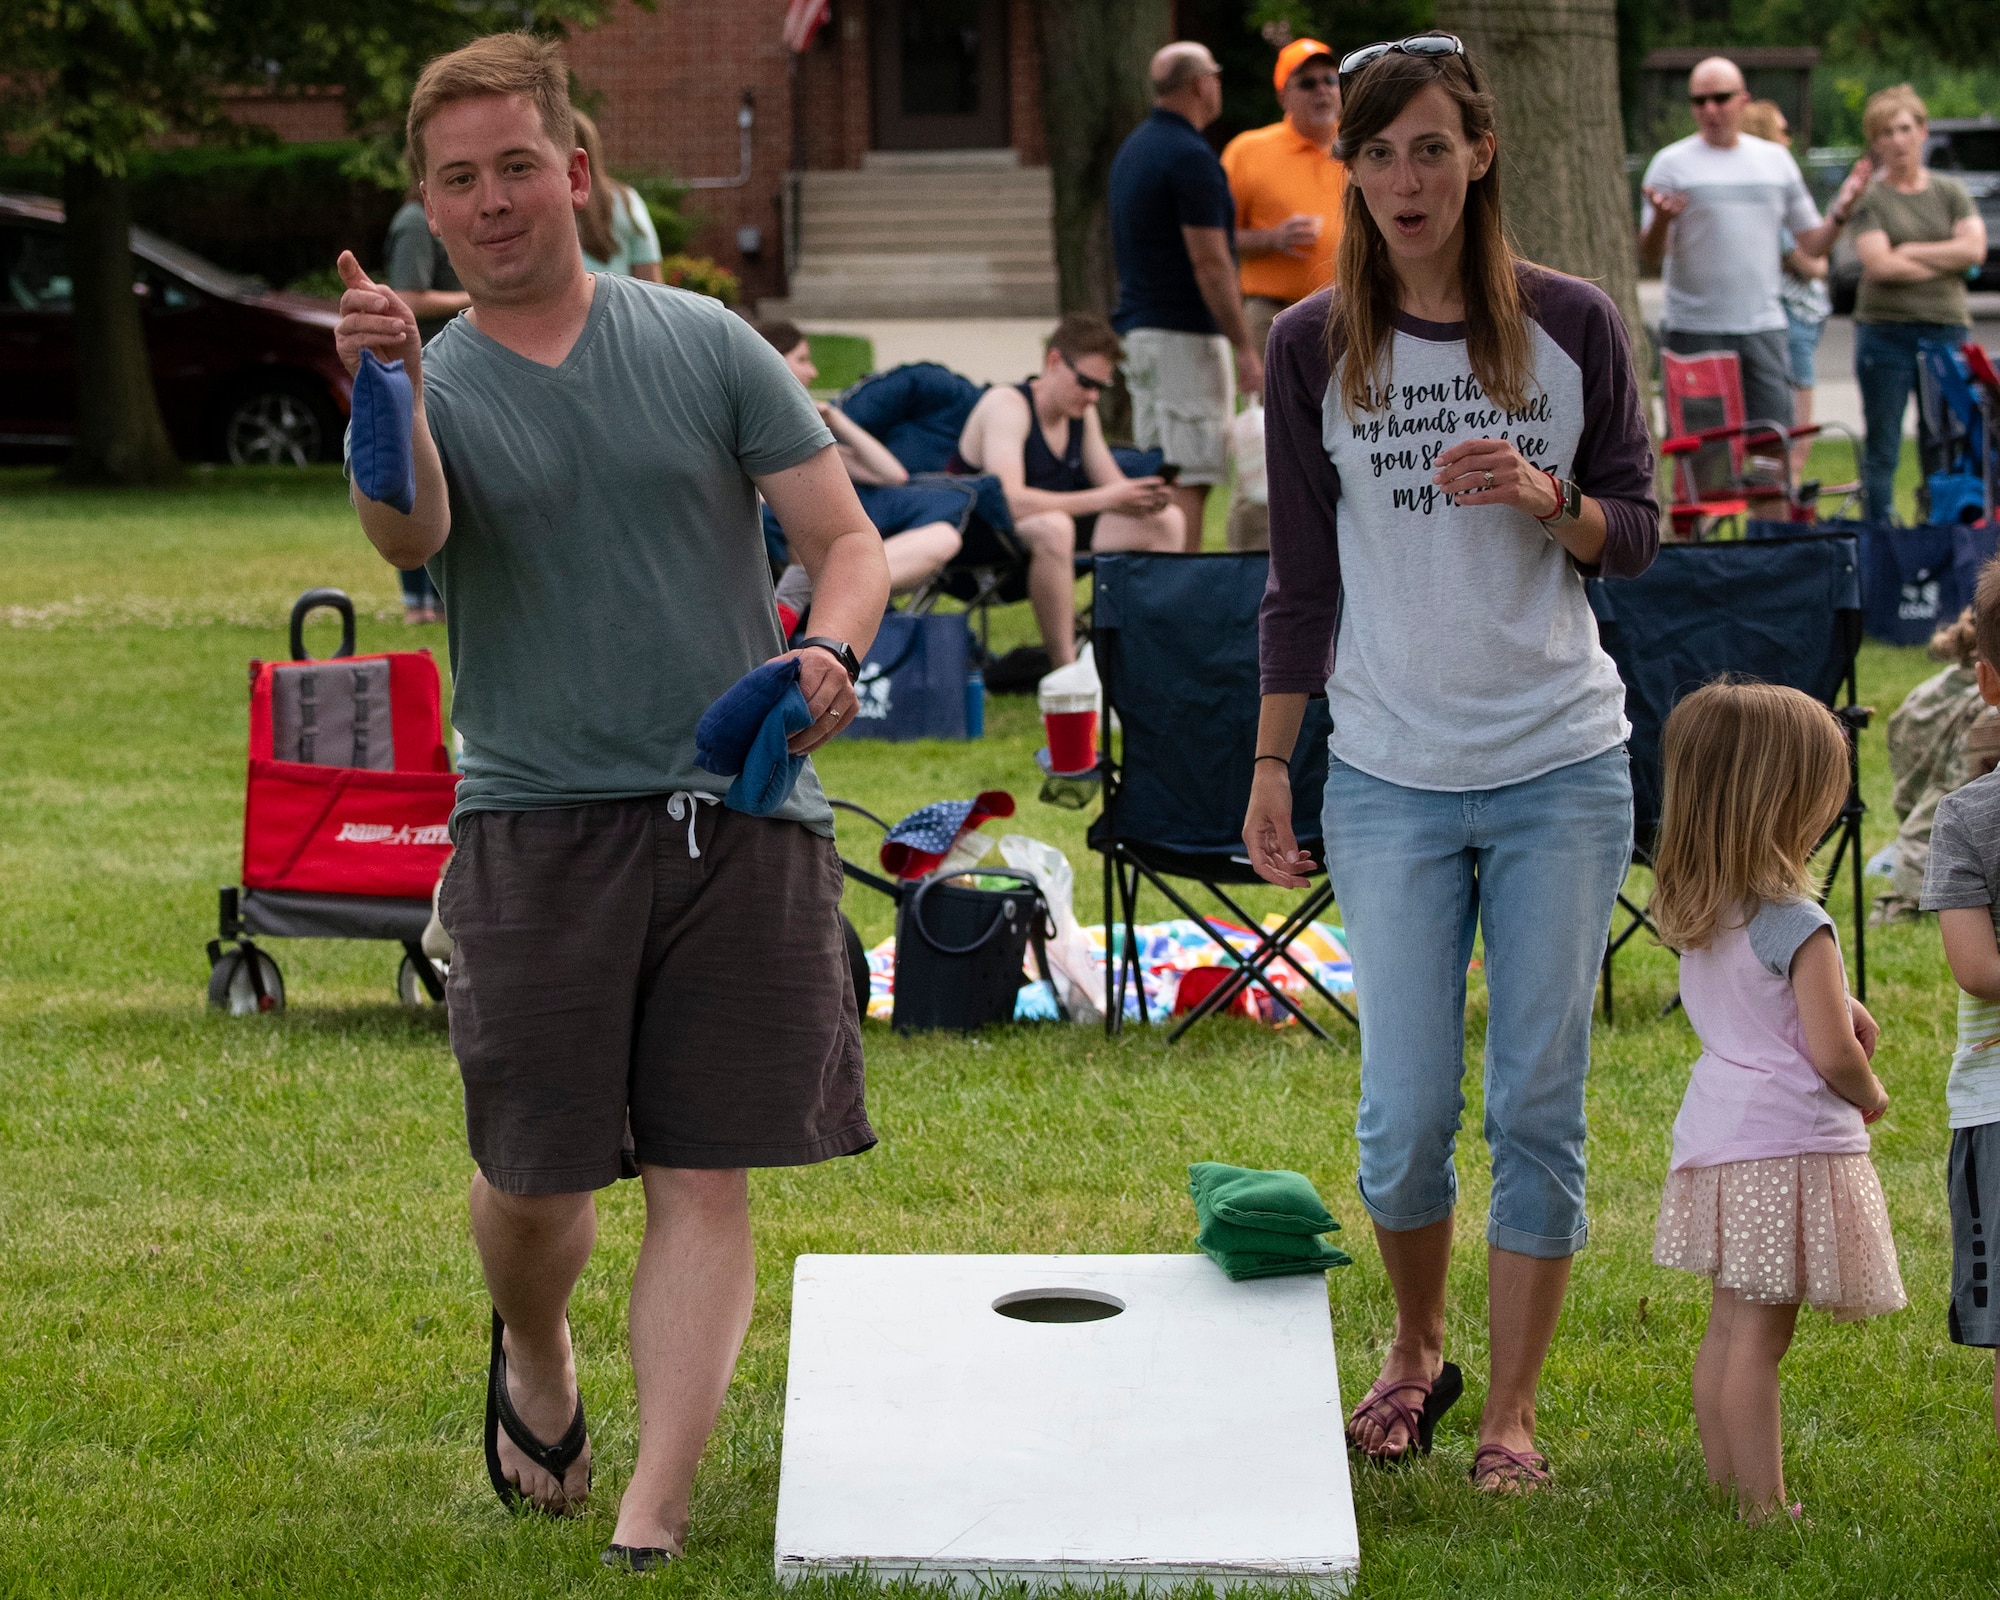 Maj. Jacob Collie, and his wife Tanya, play cornhole at a block party sponsored by the 88th Force Support Squadron June 24, 2021, at the Turtle Pond in the brick quarters historic district at Wright-Patterson Air Force Base, Ohio. The event featured music, games, food and sponsor booths and gave the Wright-Patt community an opportunity to get out and socialize. (U.S. Air Force photo by R.J. Oriez)